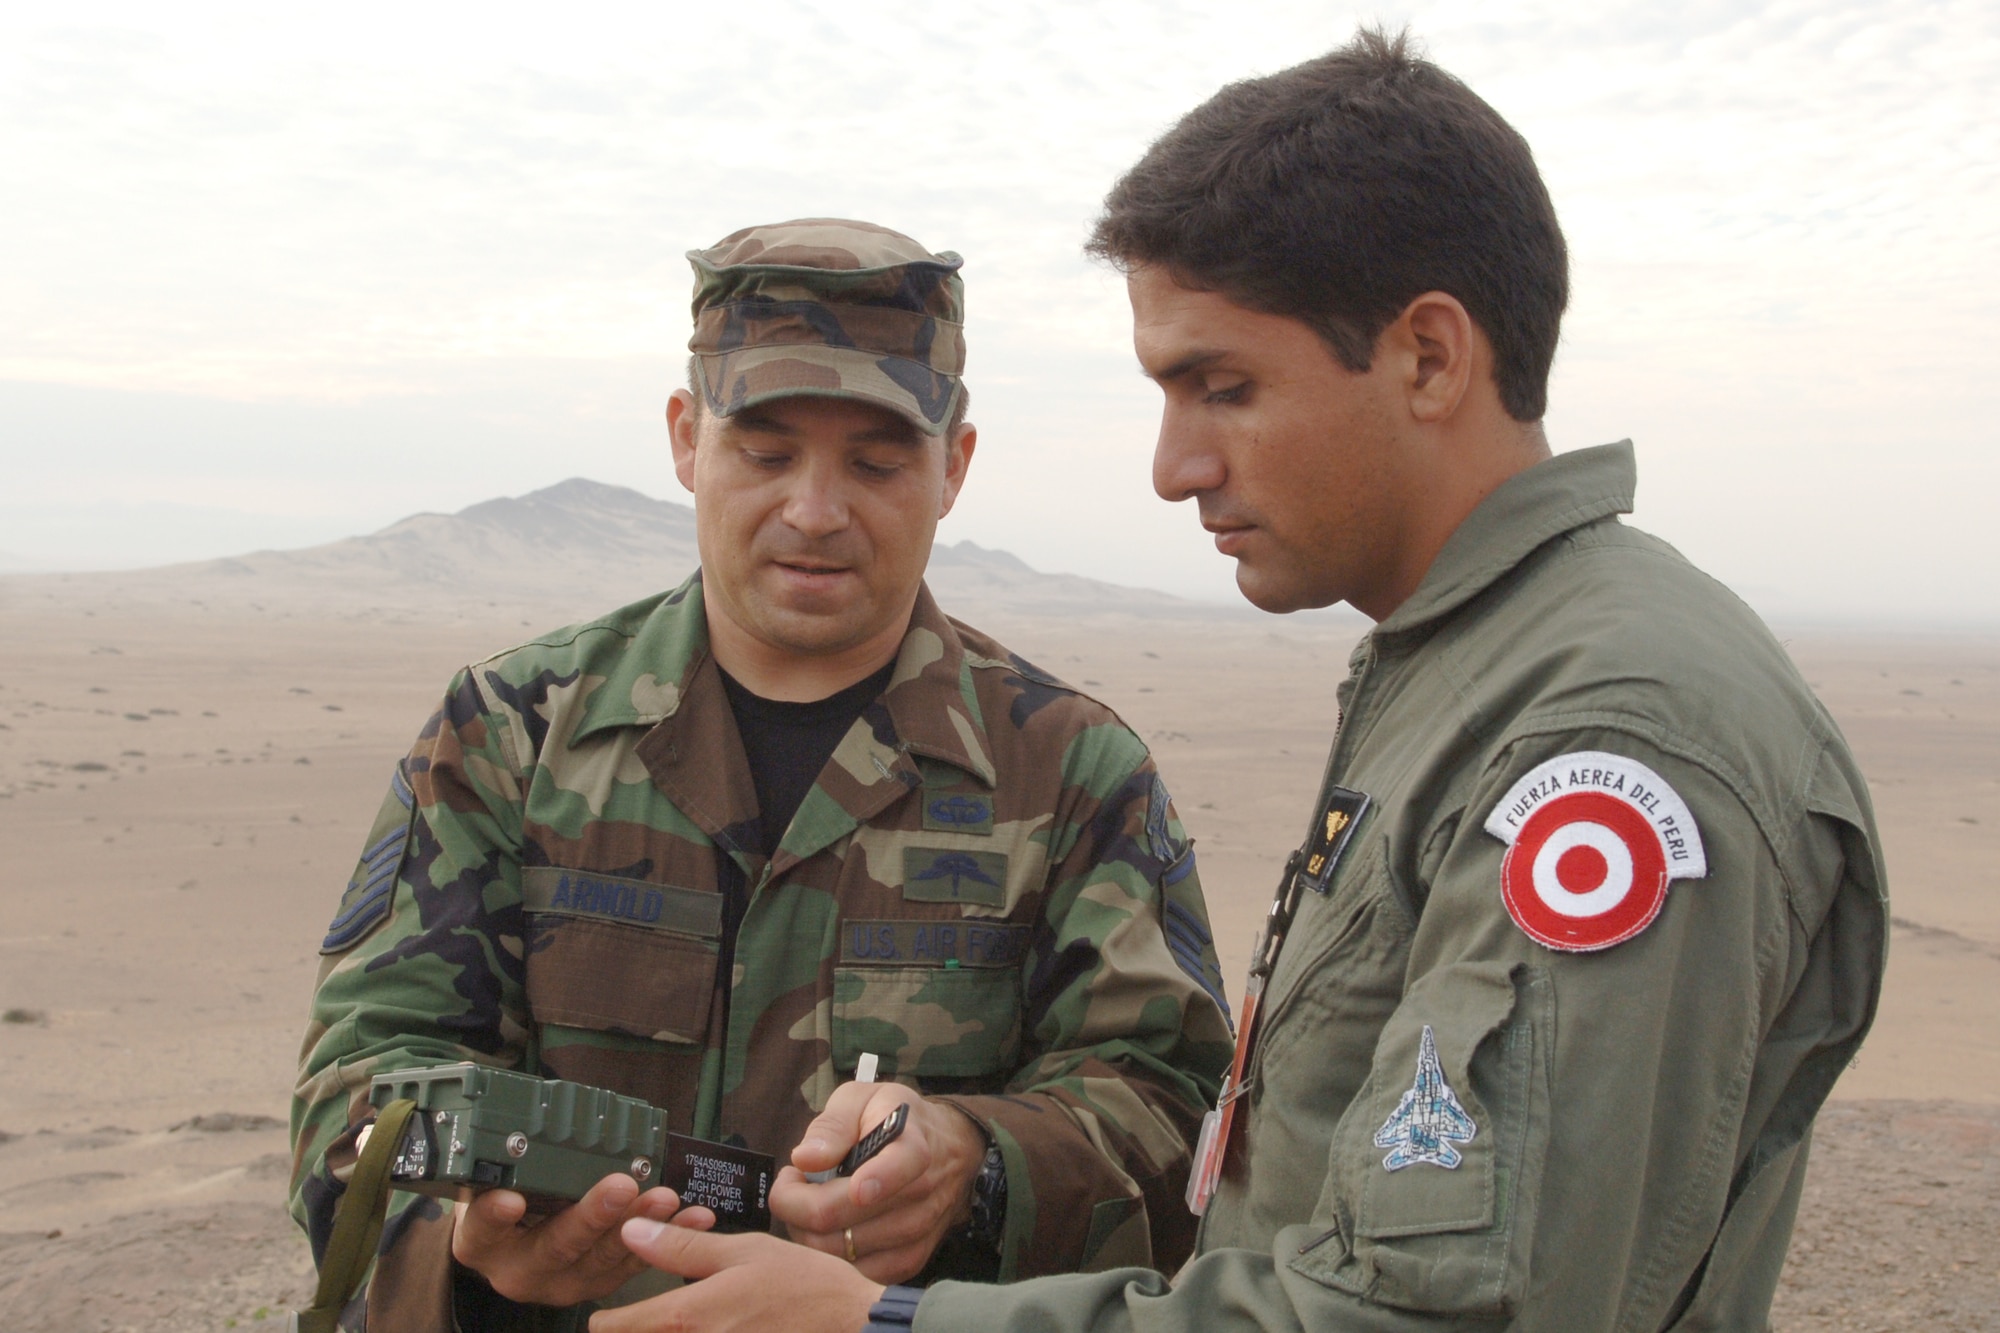 Master Sgt. Jesse Arnold goes over operations of a transmitter with a Peruvian pilot during a joint combat search and rescue exercise Feb. 14 near Chiclayo, Peru. The exercise was part of Falcon and Condor 2007, a joint exercise between the U.S. and Peruvian Air Forces. Sergeant Arnold is an Air Force survival, evasion, resistance and escape specialist. (U.S. Air Force photo/Tech. Sgt. Kerry Jackson)